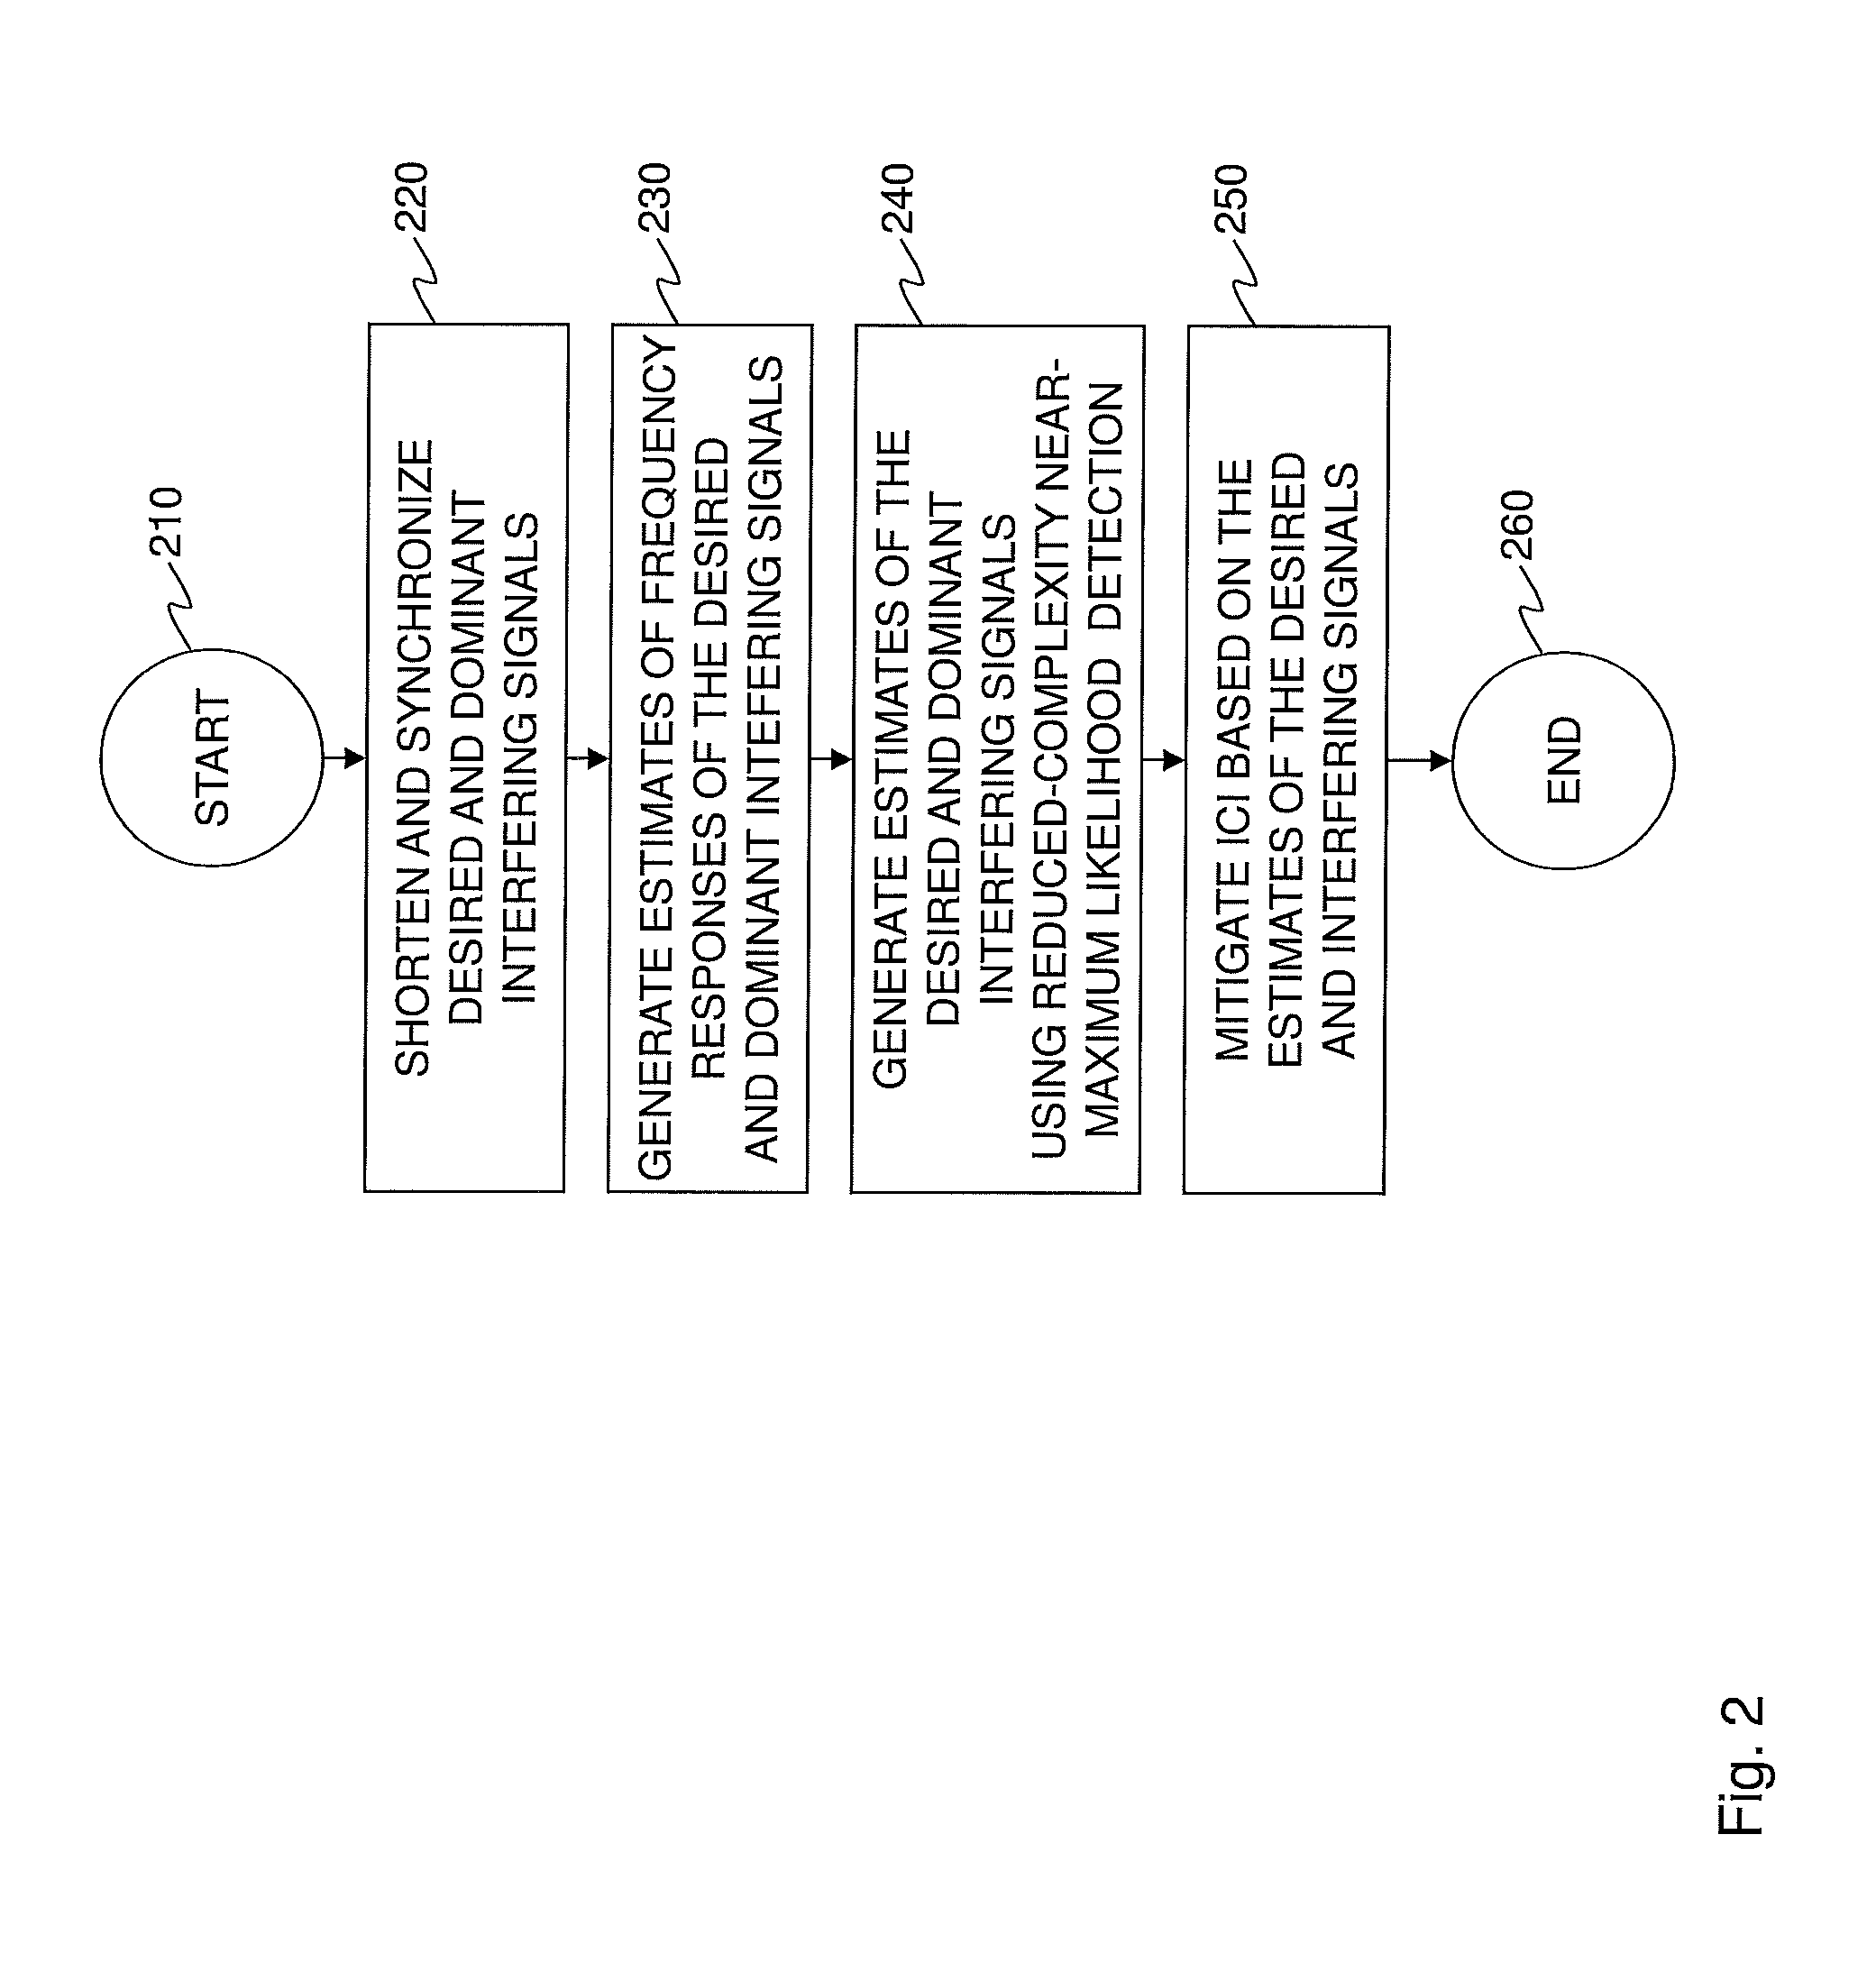 Intra-cell and inter-cell interference mitigation methods for orthogonal frequency-division multiple access cellular networks